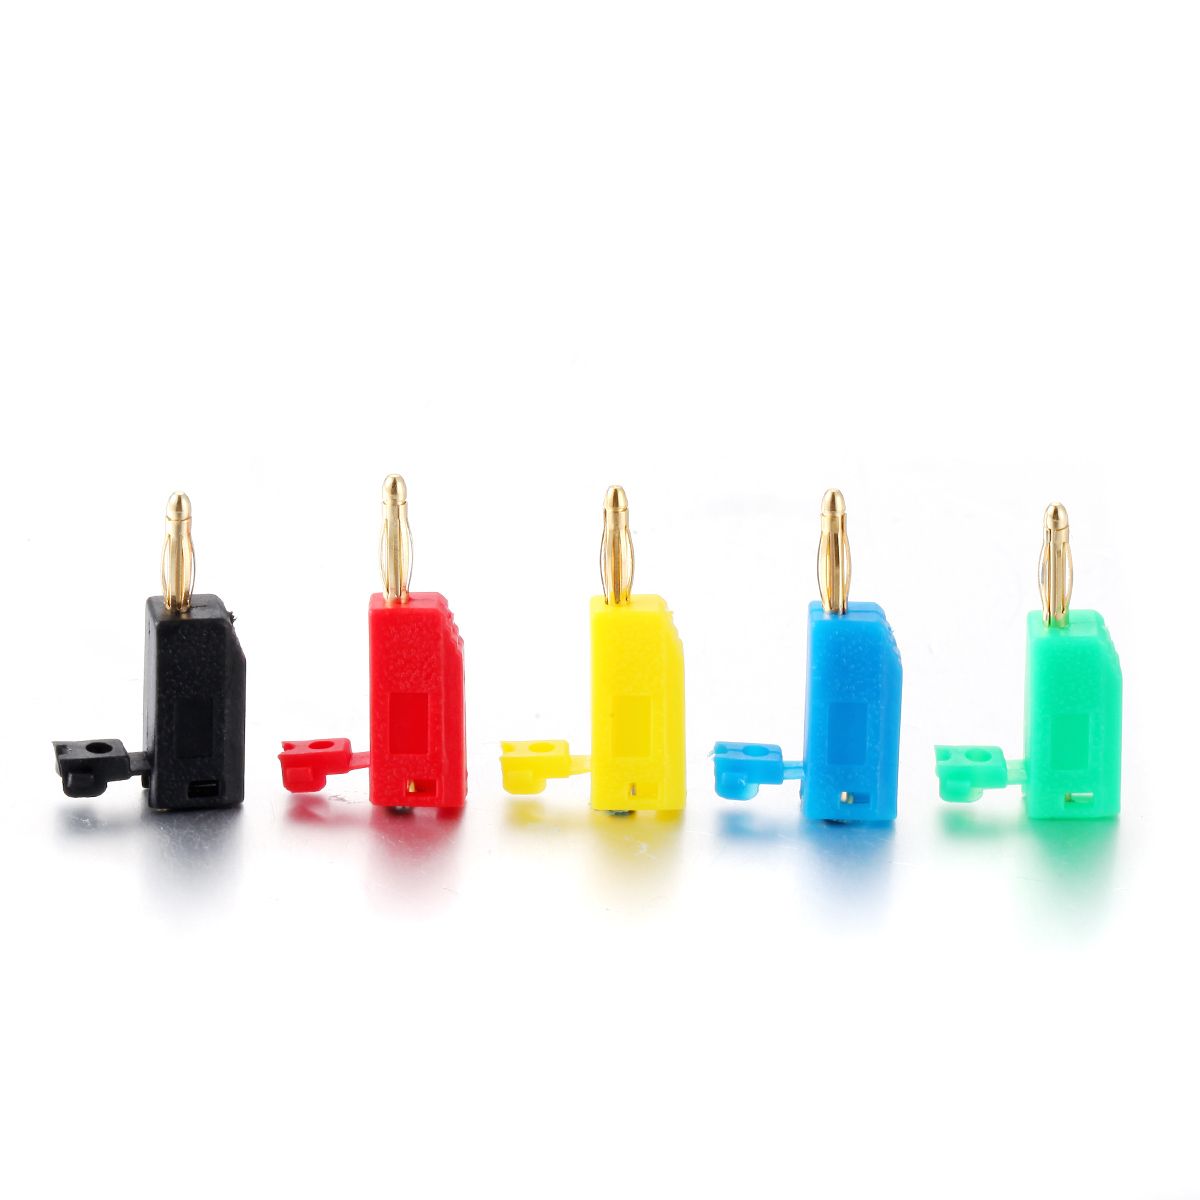 2mm Gold Plated Stackable Banana Plug Jack  Red Black Green Yellow Blue X1pair